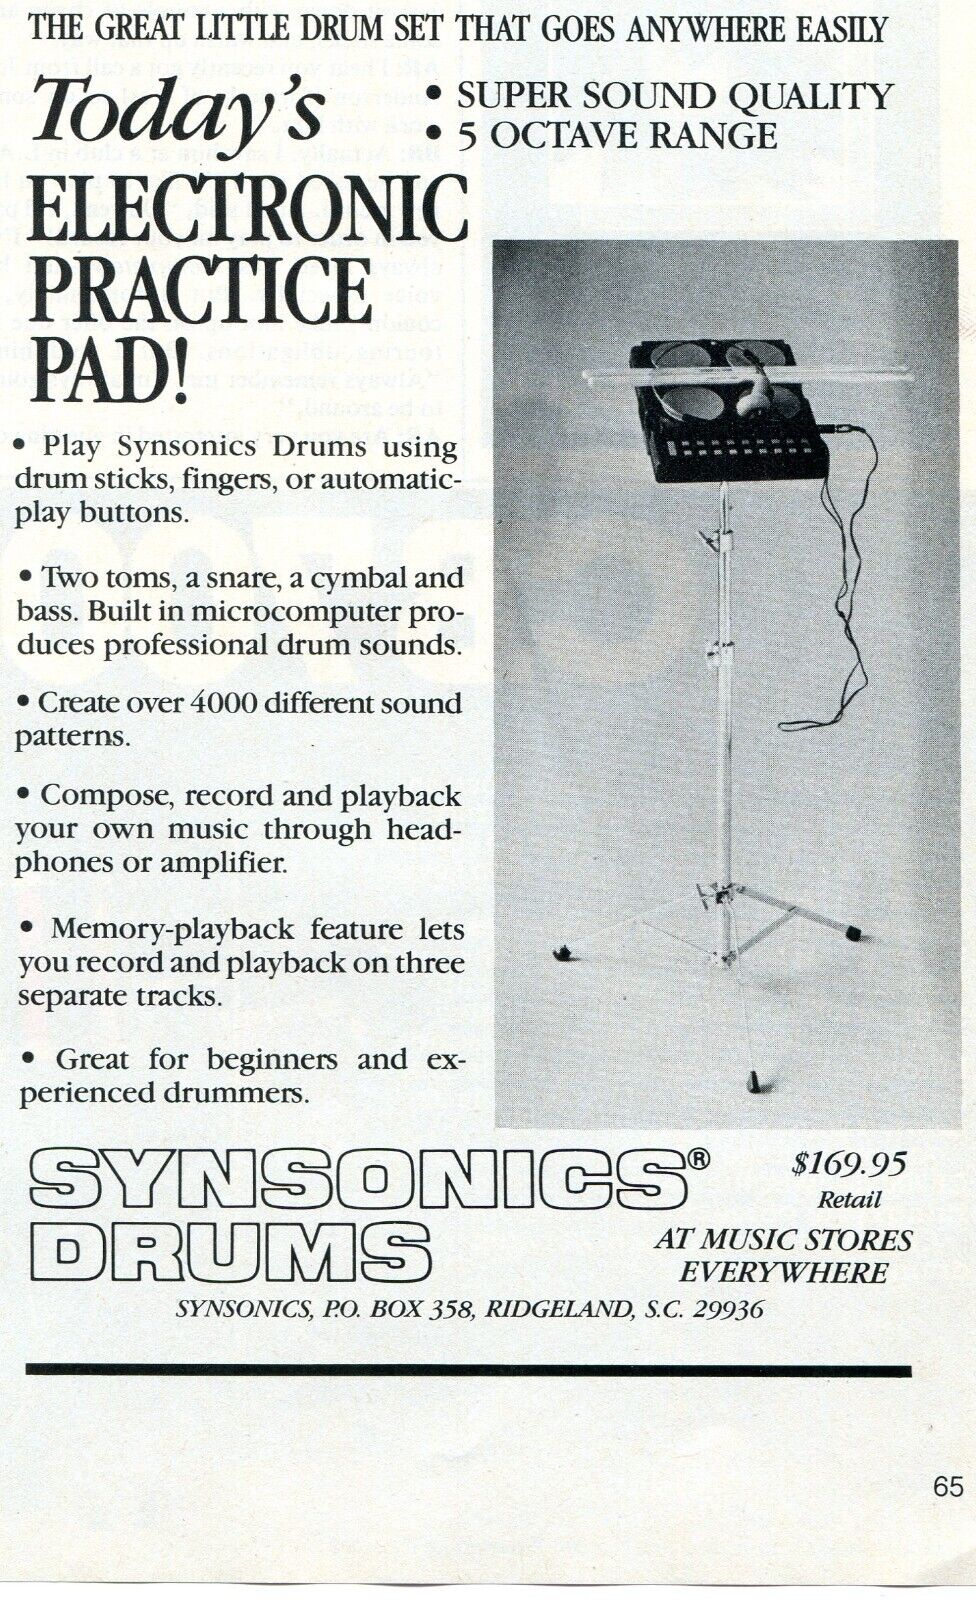 1986 small Print Ad of Synsonics Electronic Drums